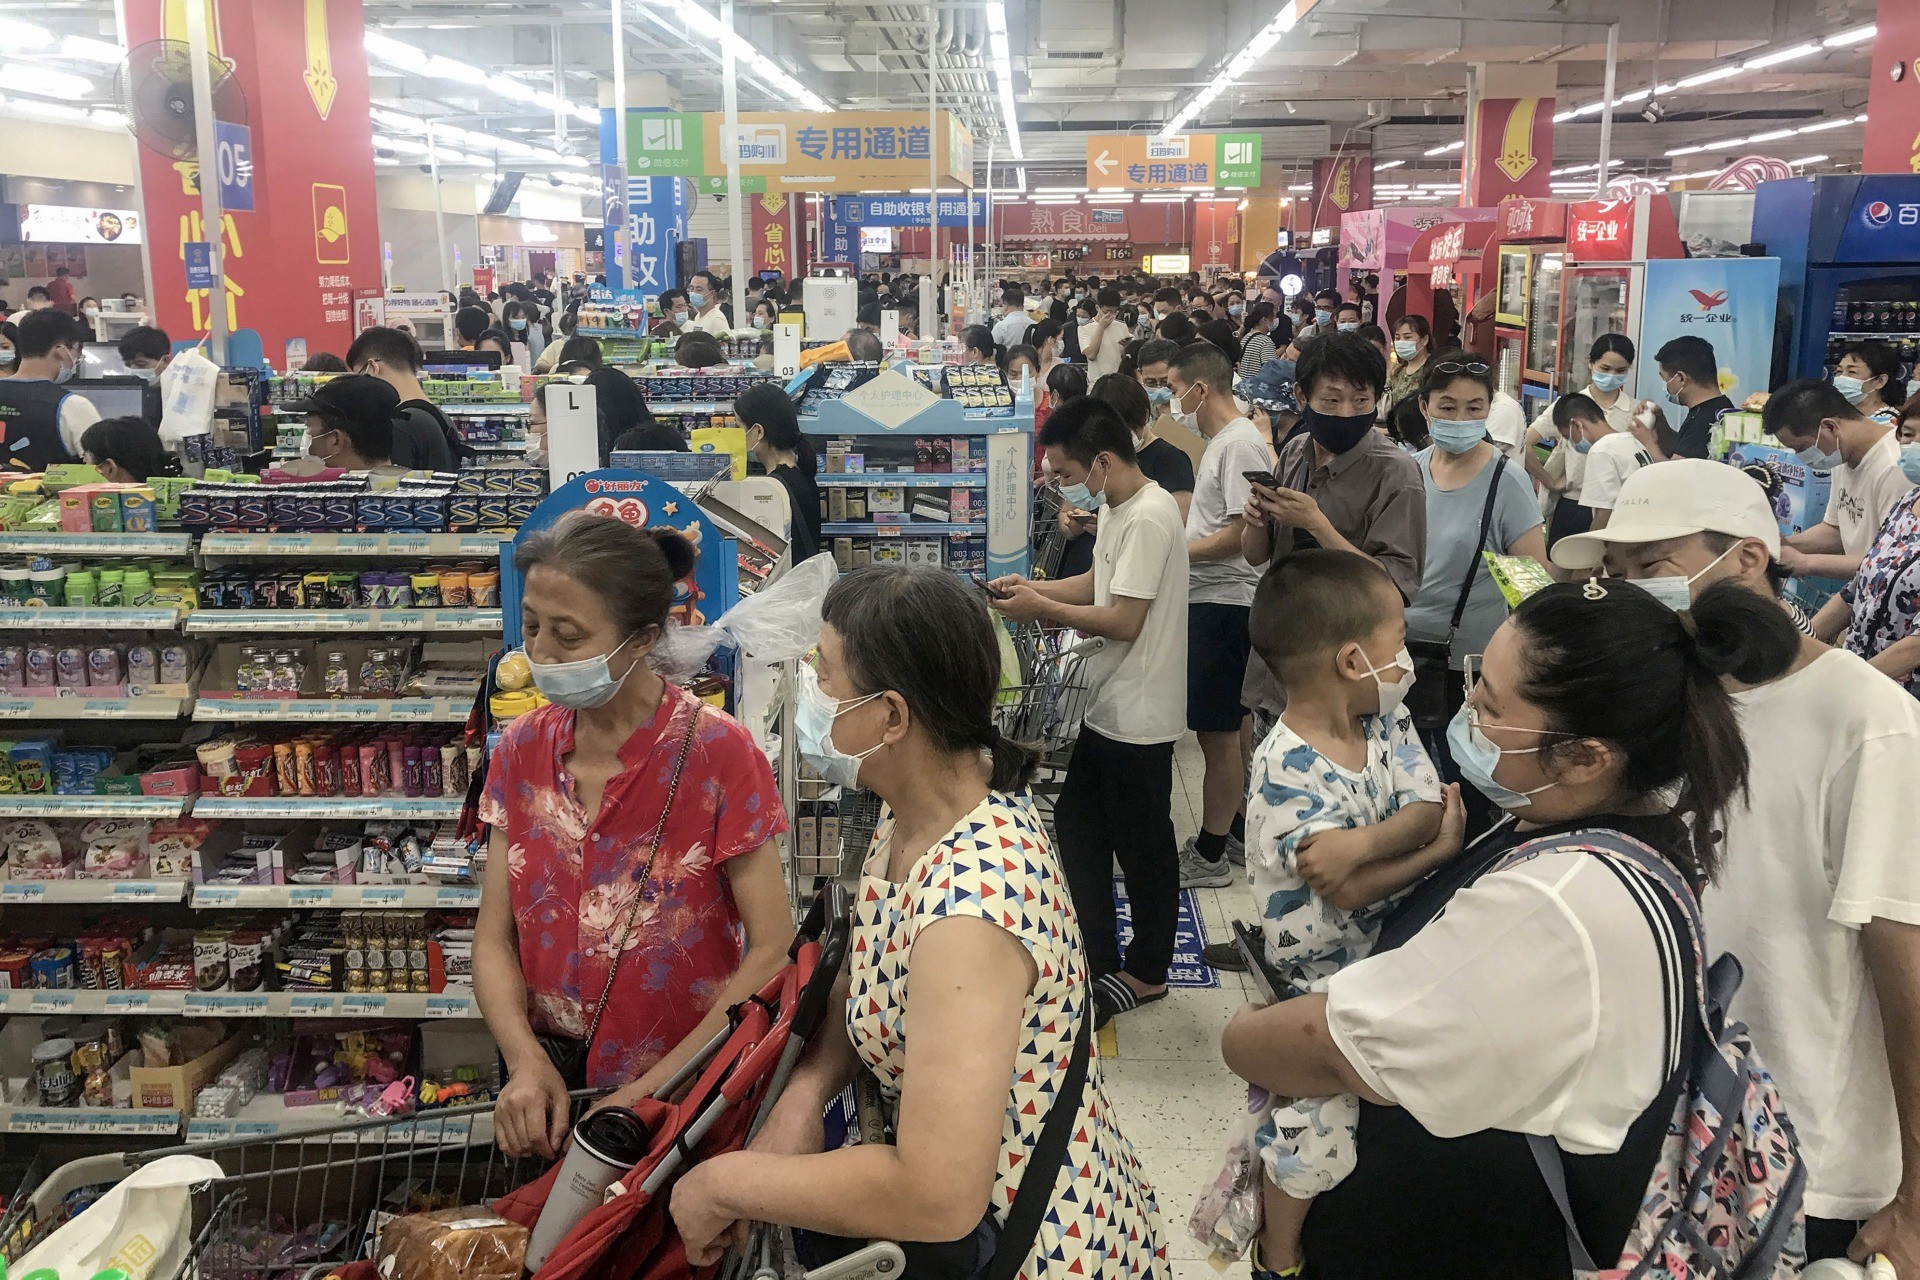 This photo taken on August 2, 2021 shows people buying items at a supermarket in Wuhan, in China's central Hubei province, as authorities said they would test its entire population for Covid-19 after the central Chinese city where the coronavirus emerged reported its first local infections in more than a year. - China OUT (Photo by STR / AFP) / China OUT (Photo by STR/AFP via Getty Images)